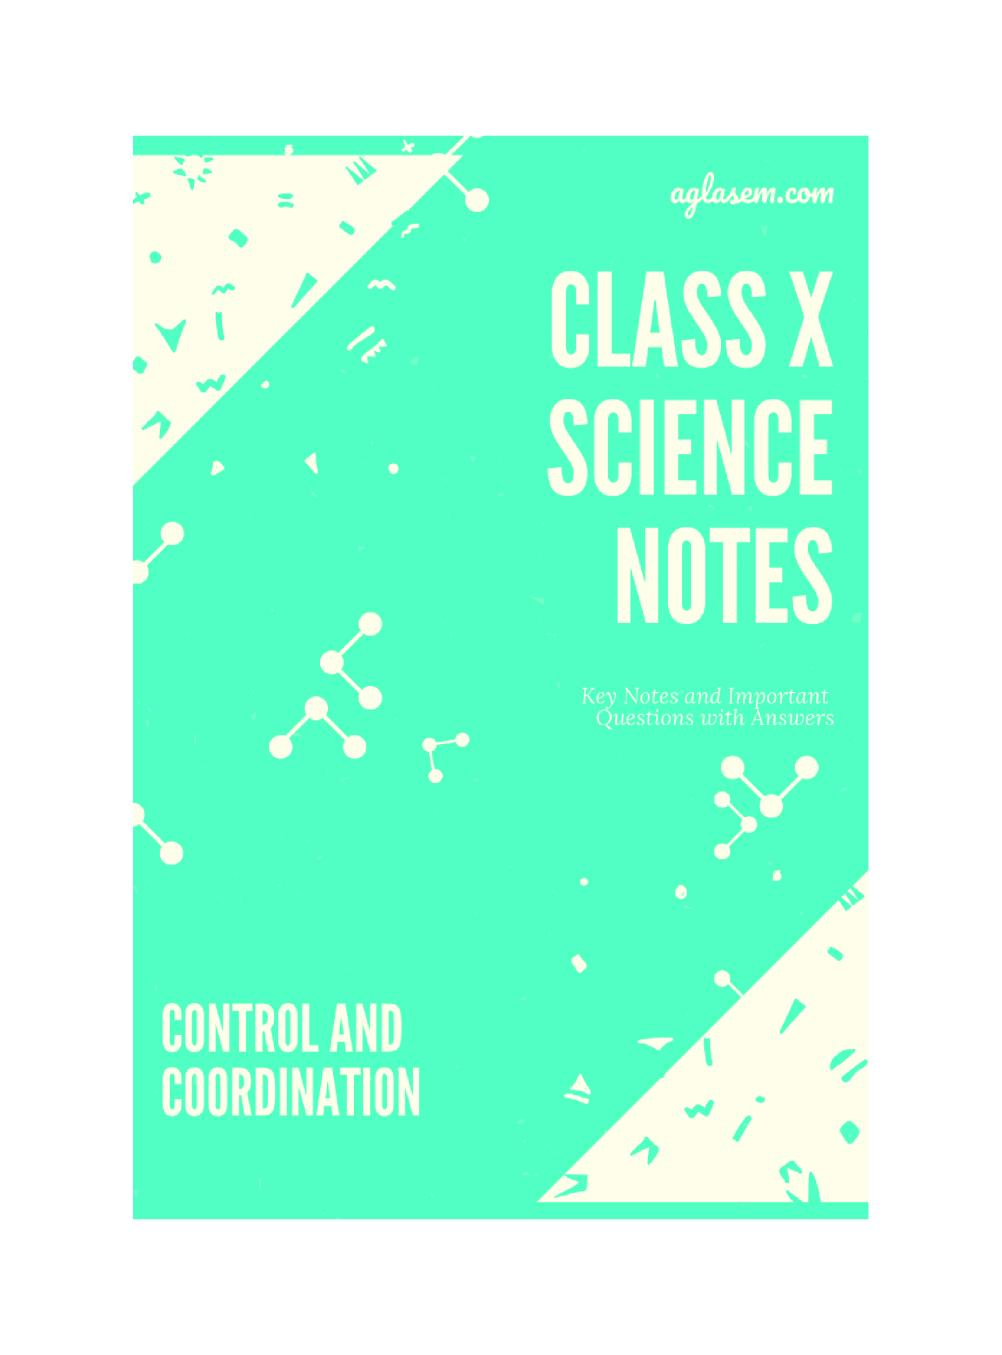 Class 10 Science Notes for Control and Coordination - Page 1